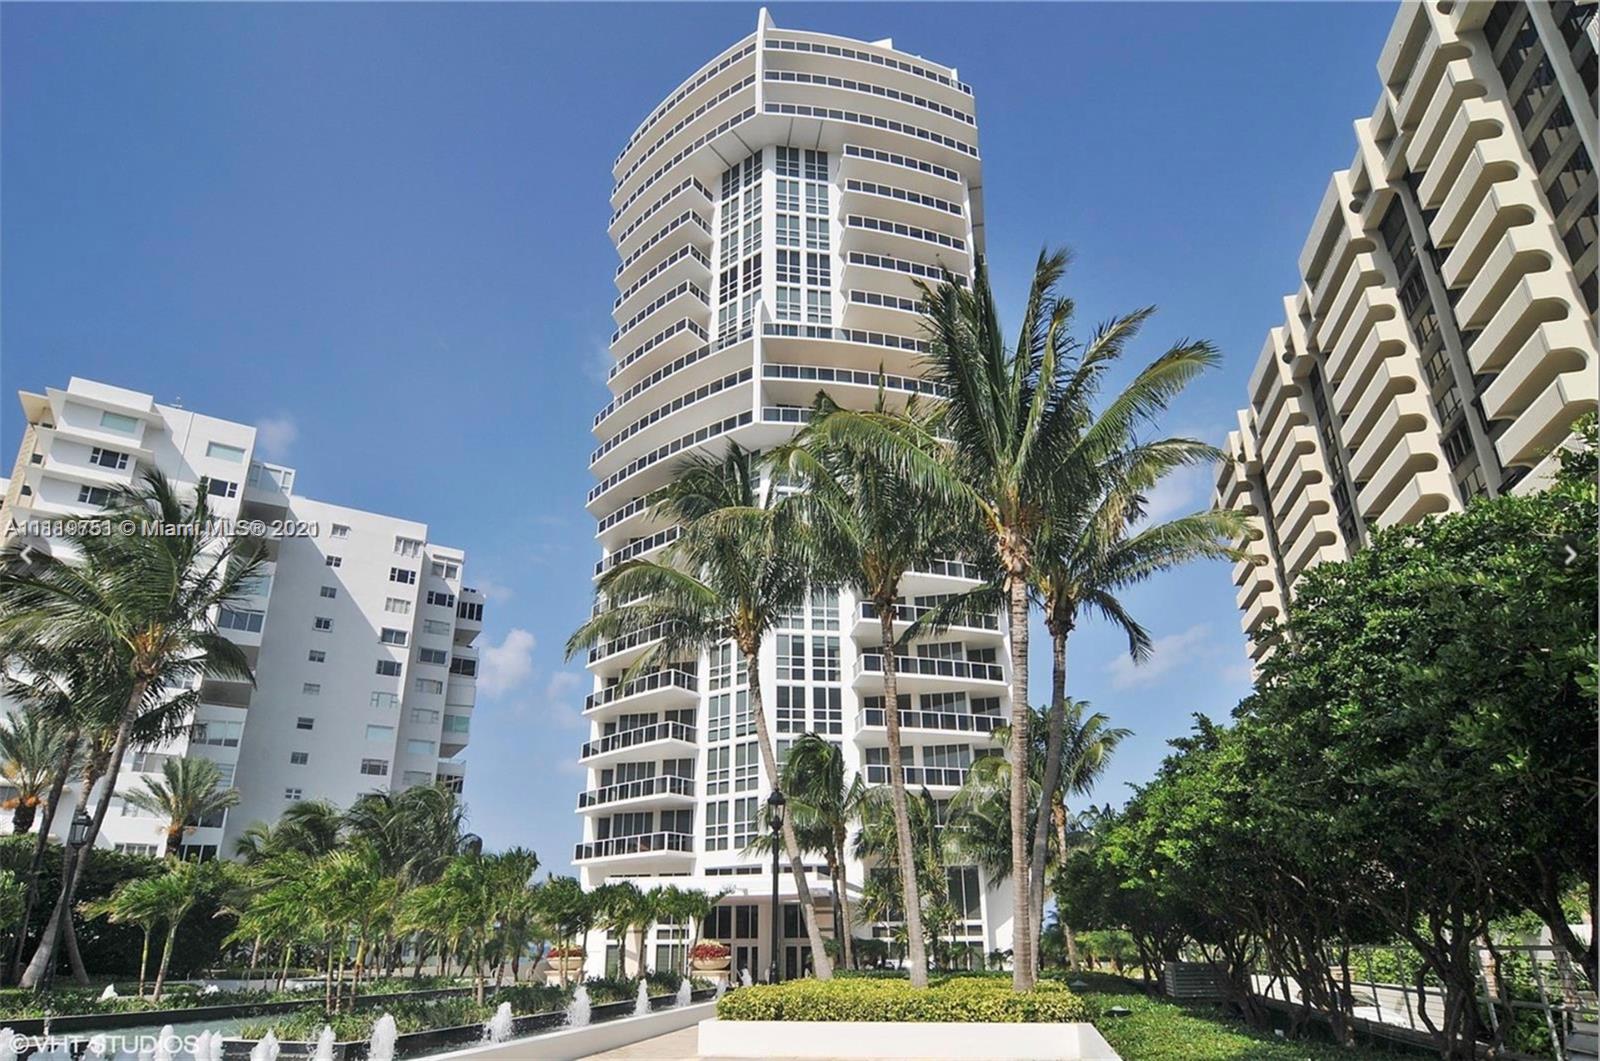 Sought after and stunning beachfront luxury Bellini building! 
THE BELLINI - LUXURIOUS & PRESTIGIOUS IN BAL HARBOUR. ON THE OCEAN WITH OCEAN, BAY AND CITY VIEWS. 4/4 3000 sq ft spacious CORNER Residence WITH PRIVATE ELEVATOR OPENING DIRECTLY INTO YOUR MAGNIFICENT OPEN AREAS WITH HIGH VOLUME CEILINGS. MAGNIFICENT DECOR AND FURNISHINGS. WRAP AROUND TERRACE TO TAKE ADVANTAGE OF BOTH SUNSET AND SUNRISE! ENJOY ALL THE AMENITIES IMAGINABLE. STROLL TO FAMOUS BAL HARBOUR SHOPS AND FINE DINING. Concierge, valet, security, beach, restaurant and more. Owner ready to make a deal. Excellent opportunity. For sale $2.6 Million